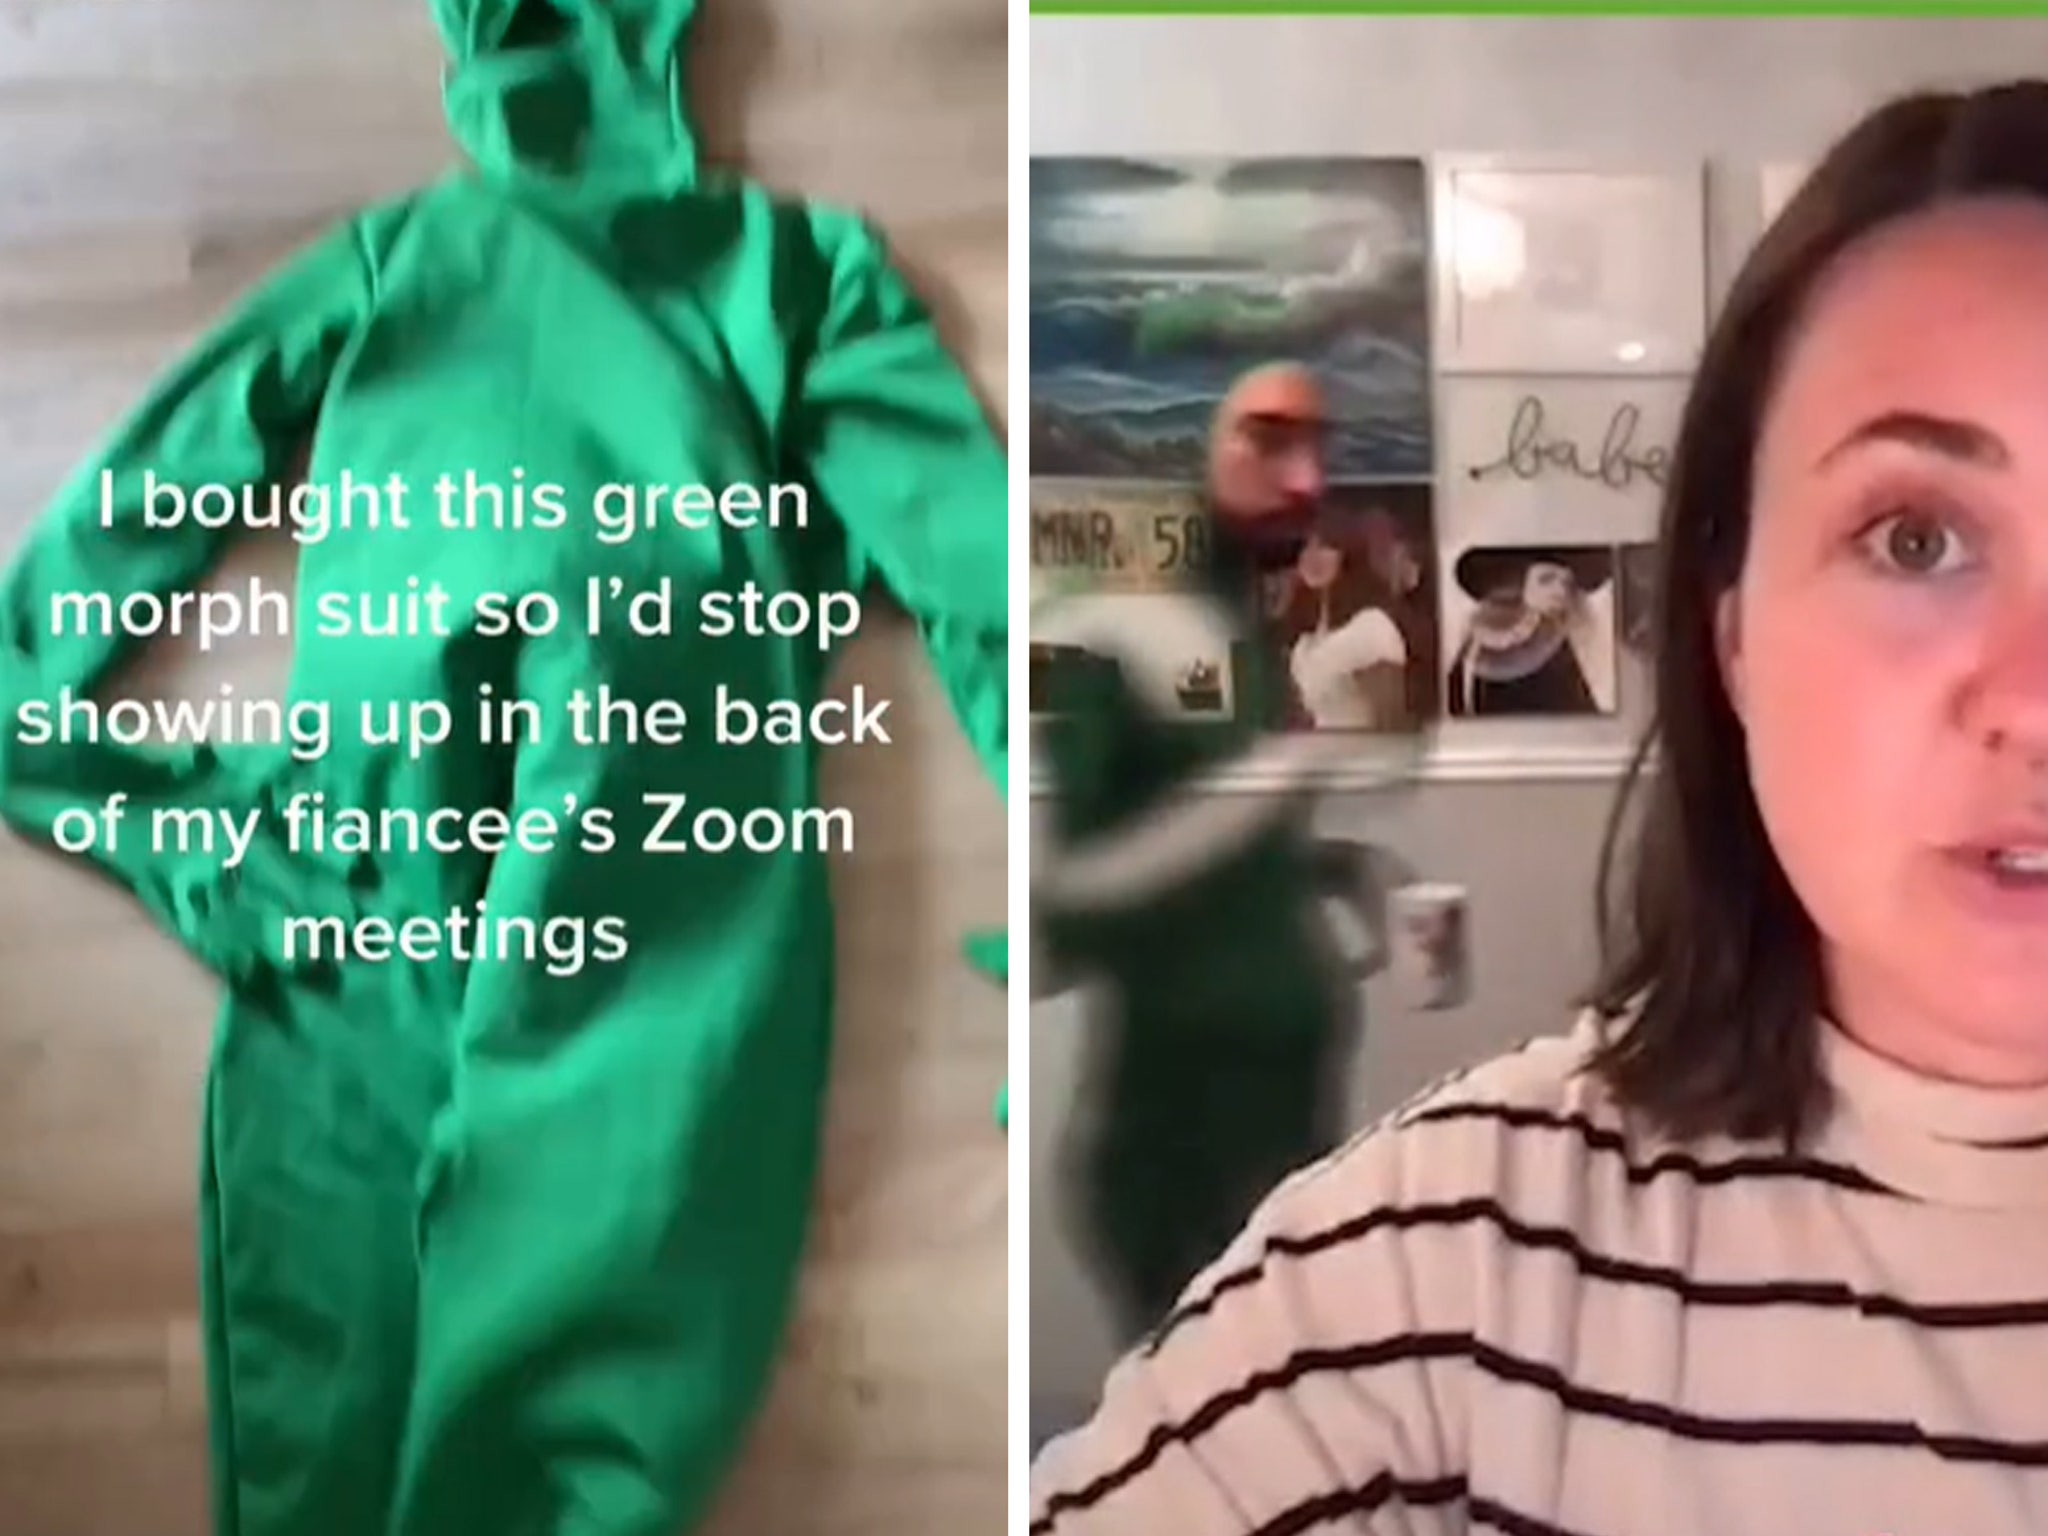 Man Wears Green Morph Suit to Stop Accidentally Appearing in